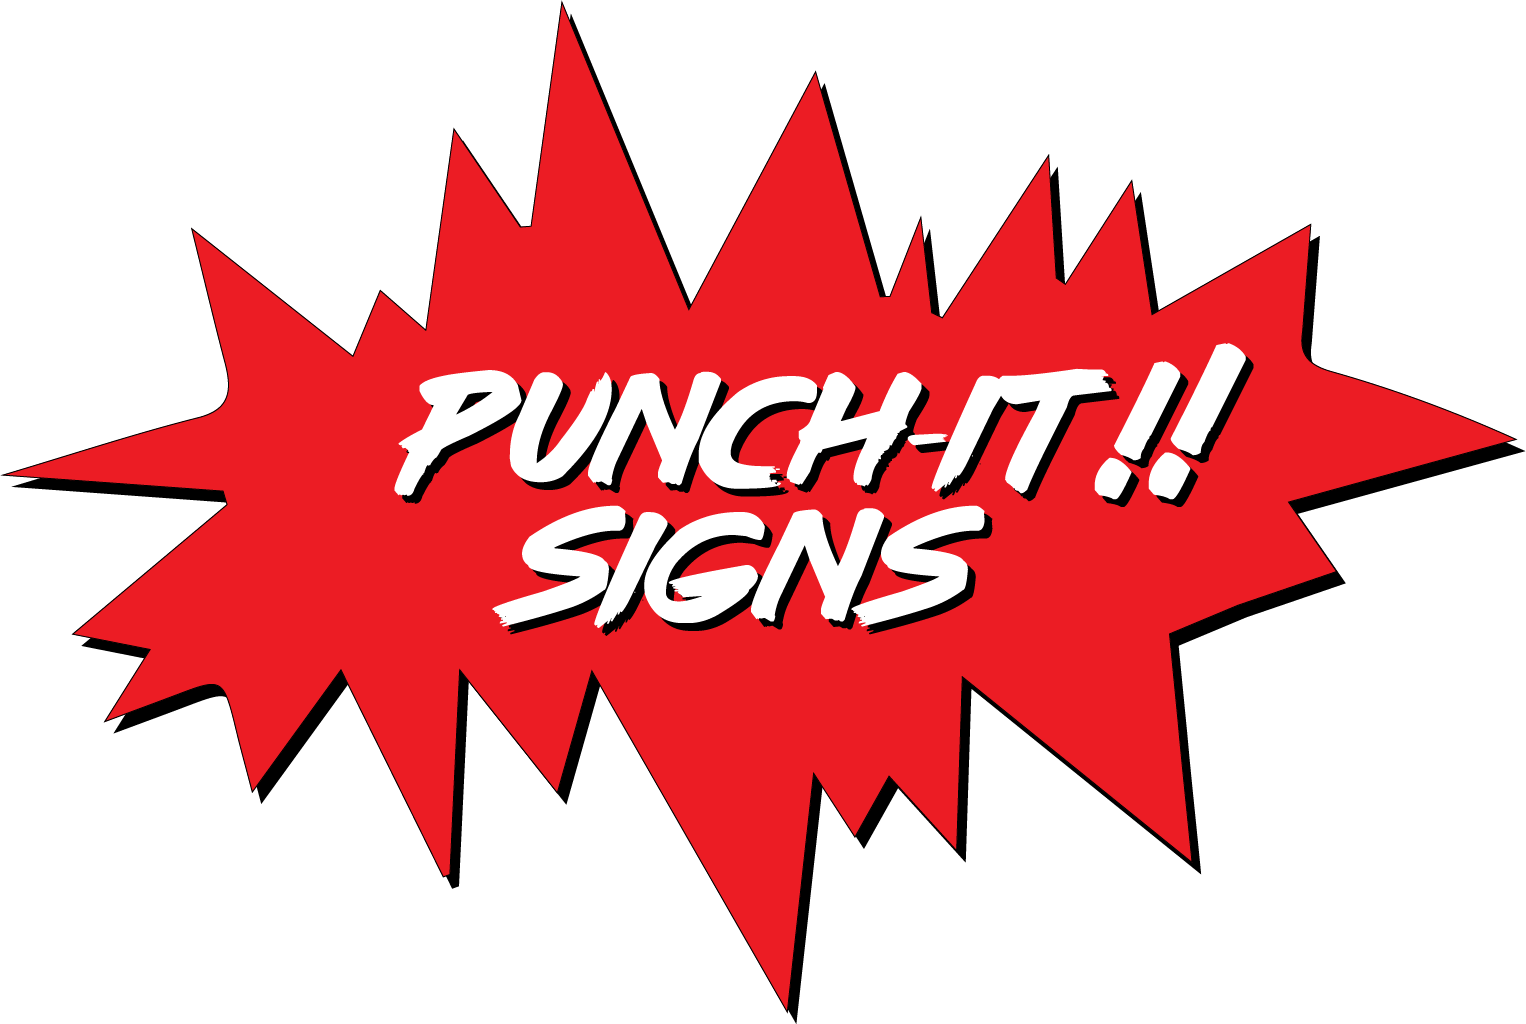 Punch it Signs